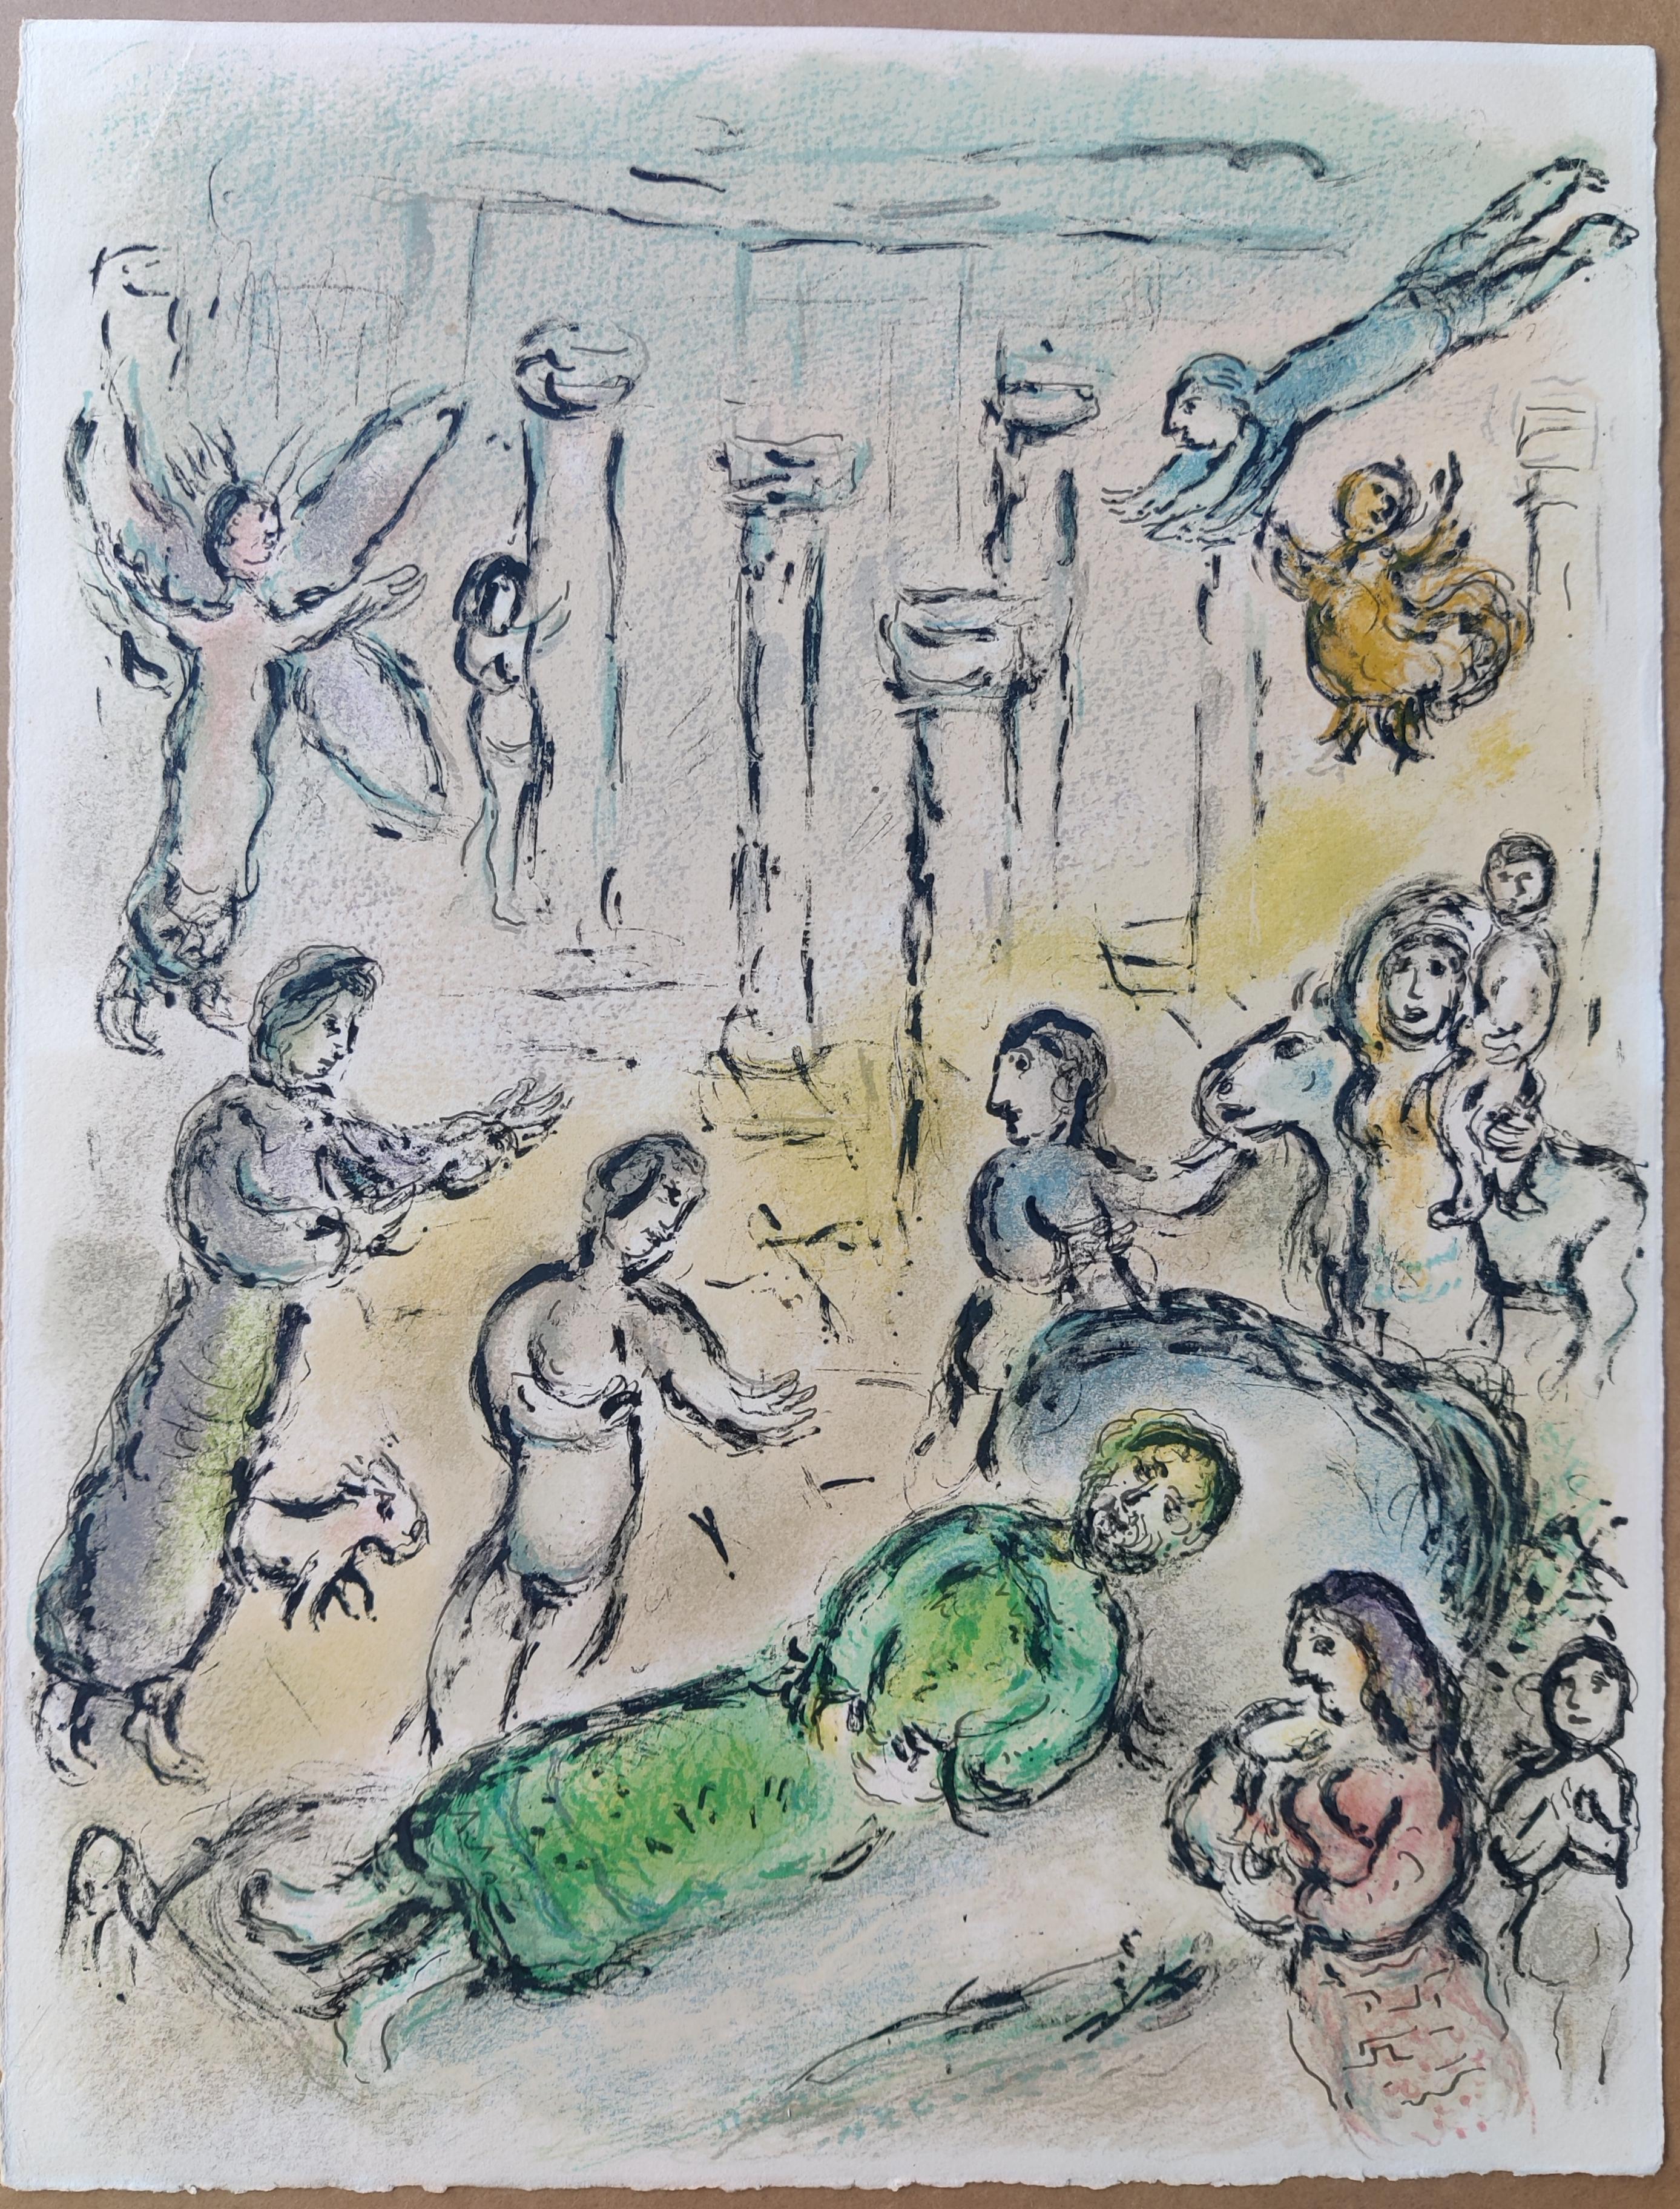 MARC CHAGALL  -- Le Lit d'Ulysse from L'Odyssée II, 1975
Lithograph in colors
Unsigned, one of 250 
published by Mourlot, Paris
Literature    Mourlot 829
Unframed
Sheet: 42.5 x 32.5 cm
